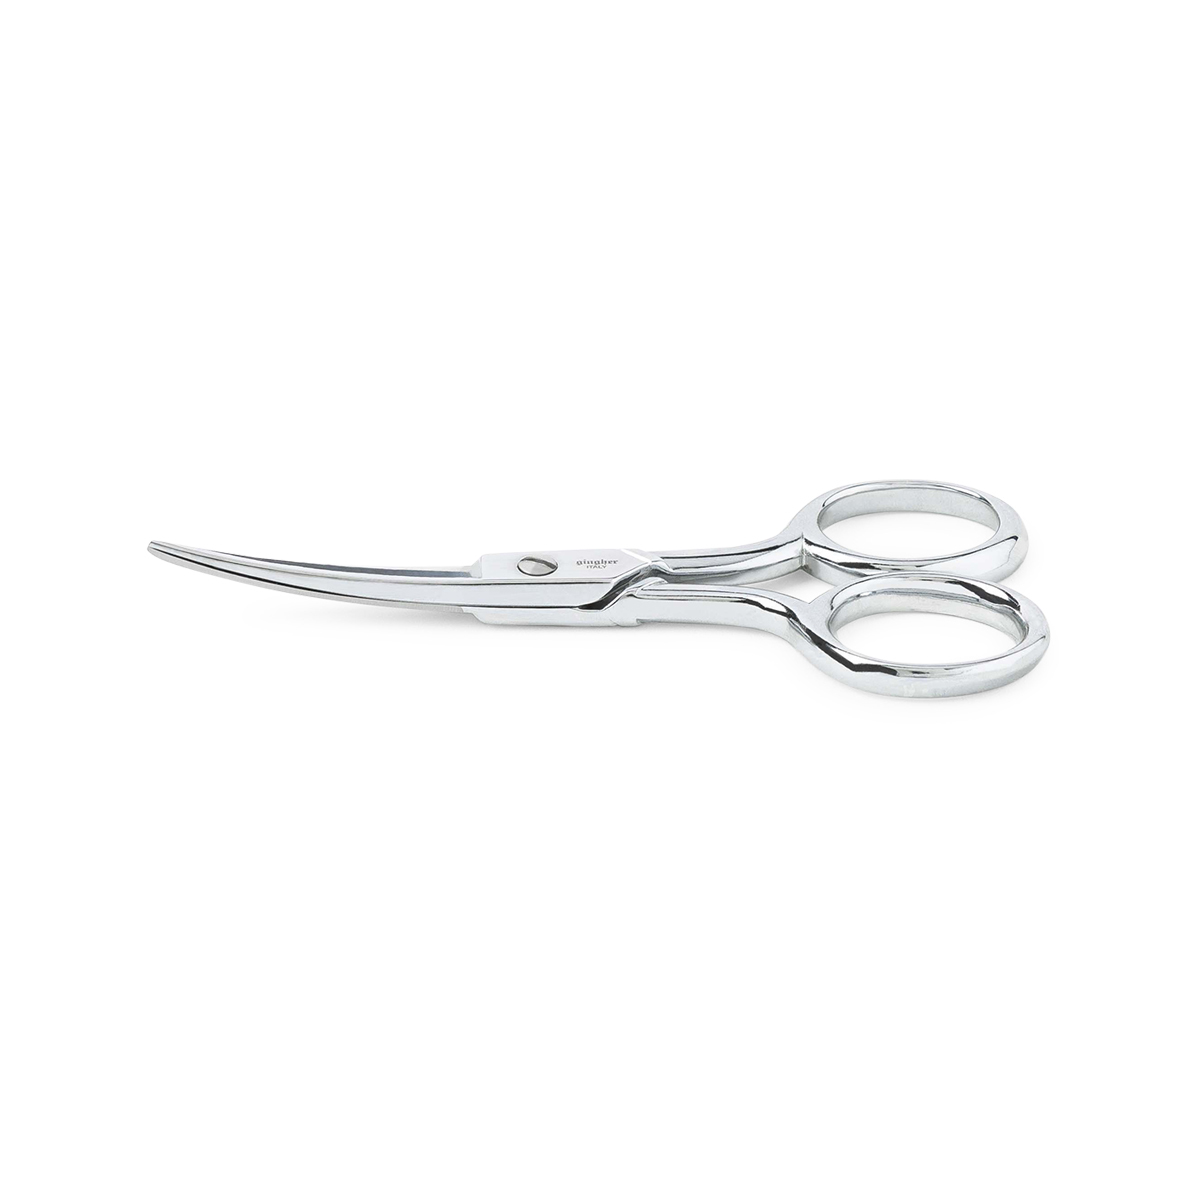 4 Mini Double Curved Embroidery Scissors